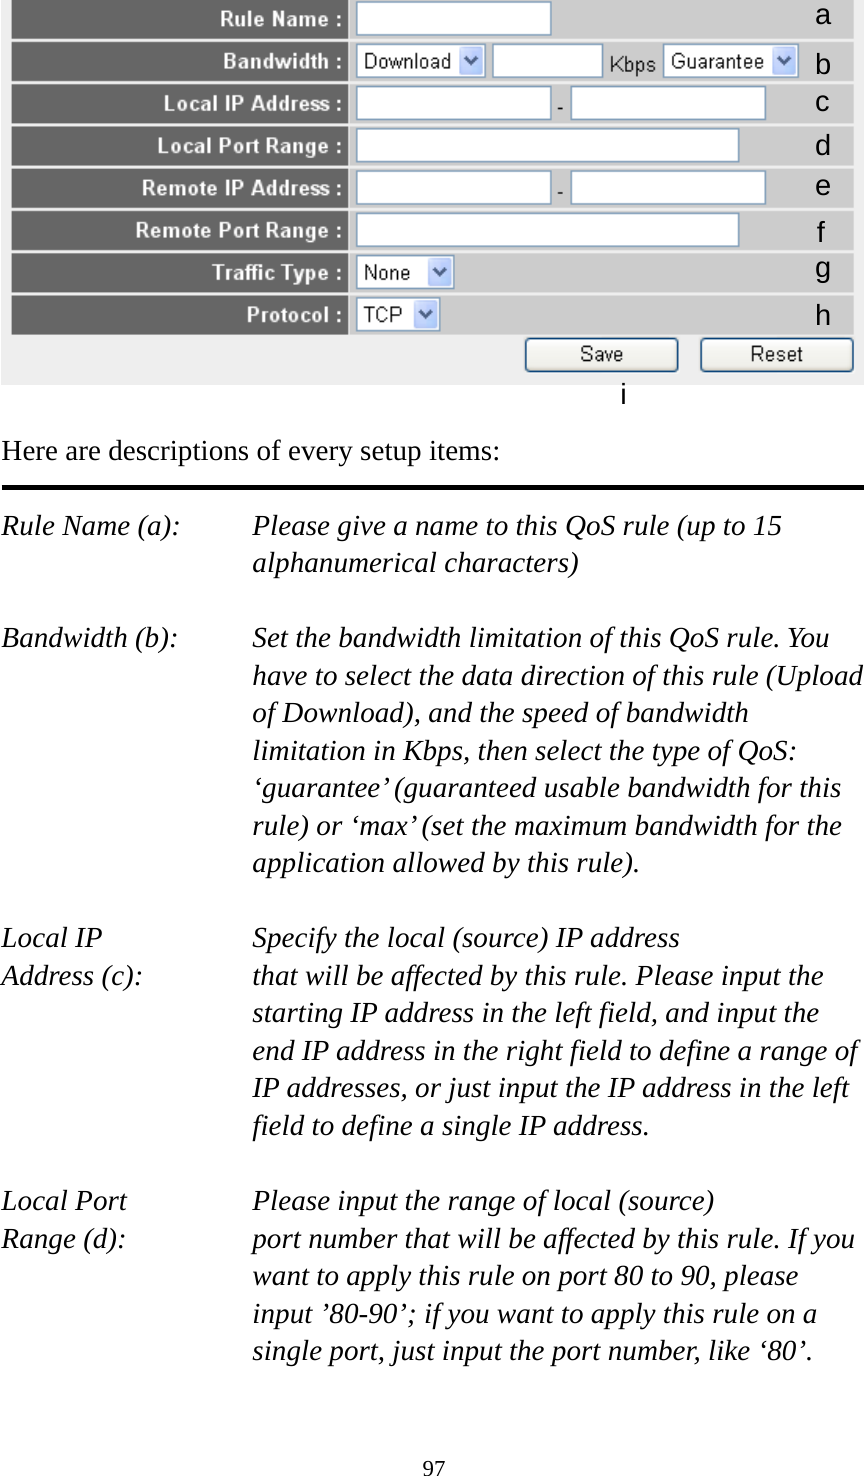 97   Here are descriptions of every setup items:  Rule Name (a):    Please give a name to this QoS rule (up to 15 alphanumerical characters)  Bandwidth (b):    Set the bandwidth limitation of this QoS rule. You have to select the data direction of this rule (Upload of Download), and the speed of bandwidth limitation in Kbps, then select the type of QoS: ‘guarantee’ (guaranteed usable bandwidth for this rule) or ‘max’ (set the maximum bandwidth for the application allowed by this rule).  Local IP        Specify the local (source) IP address Address (c):     that will be affected by this rule. Please input the starting IP address in the left field, and input the end IP address in the right field to define a range of IP addresses, or just input the IP address in the left field to define a single IP address.  Local Port       Please input the range of local (source) Range (d):    port number that will be affected by this rule. If you want to apply this rule on port 80 to 90, please input ’80-90’; if you want to apply this rule on a single port, just input the port number, like ‘80’.  a b c d e f g h i